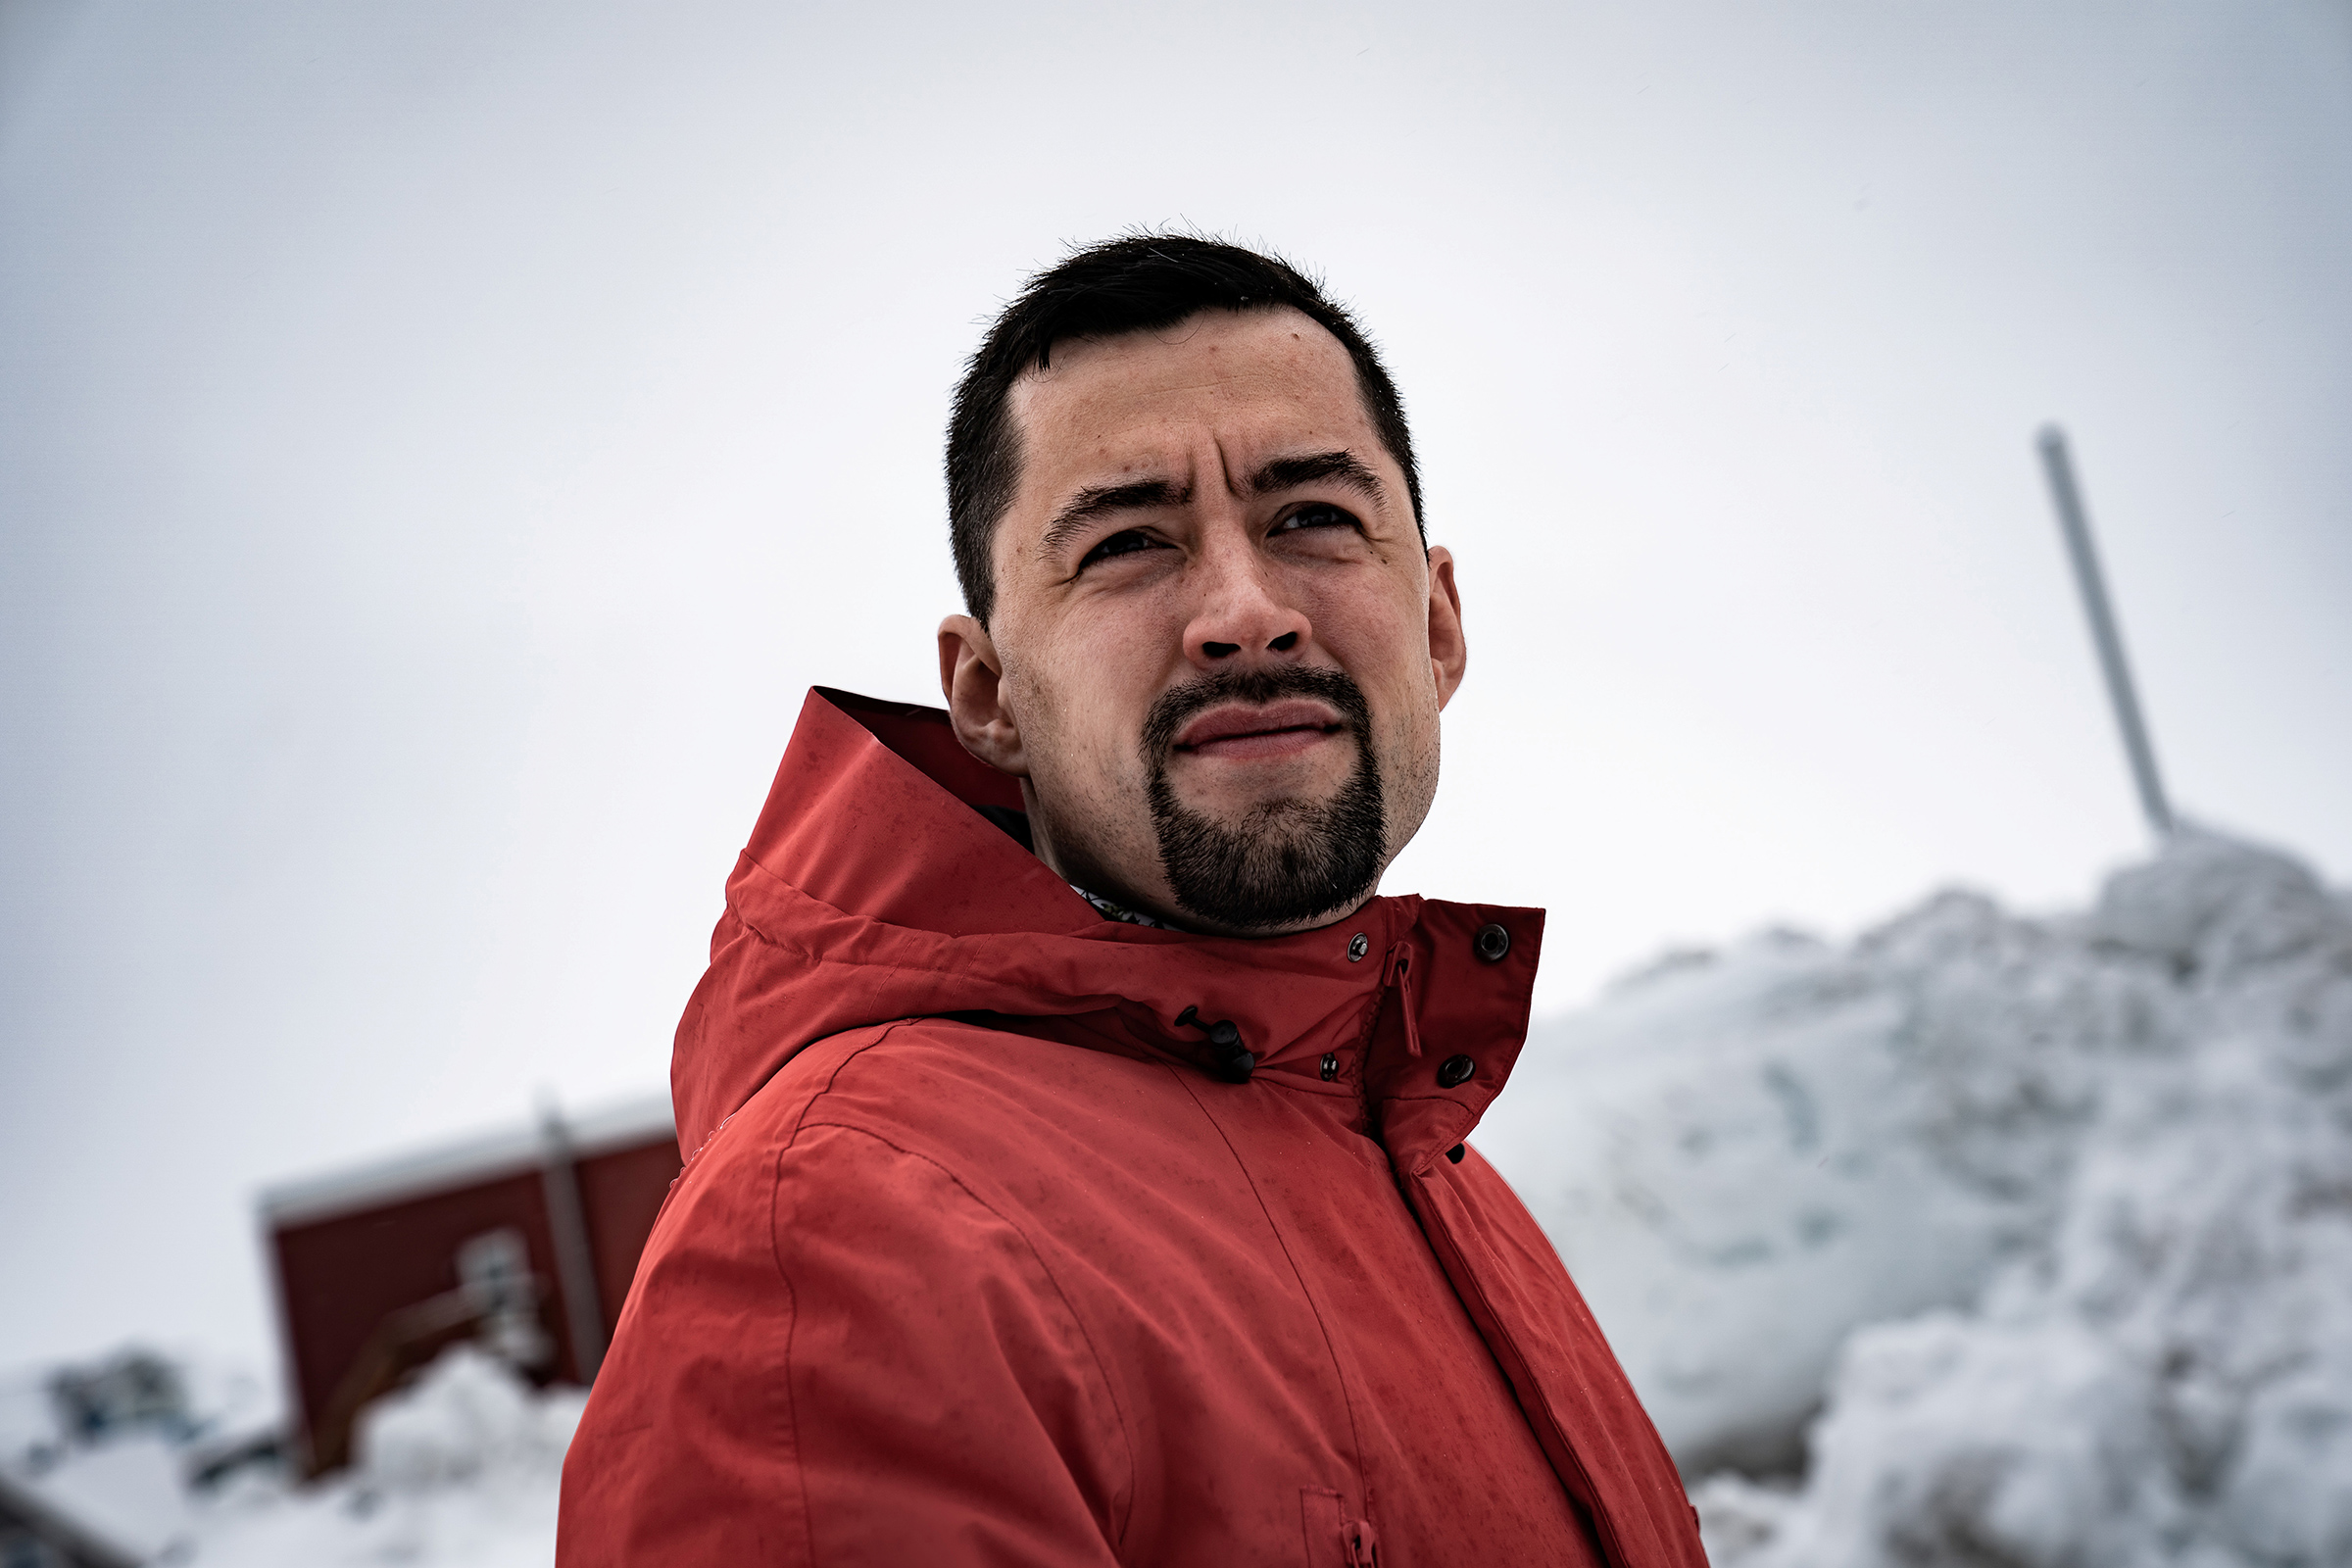 Mute Egede, pictured ahead of the parliamentary elections in April, in which his Inuit Ataqatigiit party secured a win and lifted him to Prime Minister.